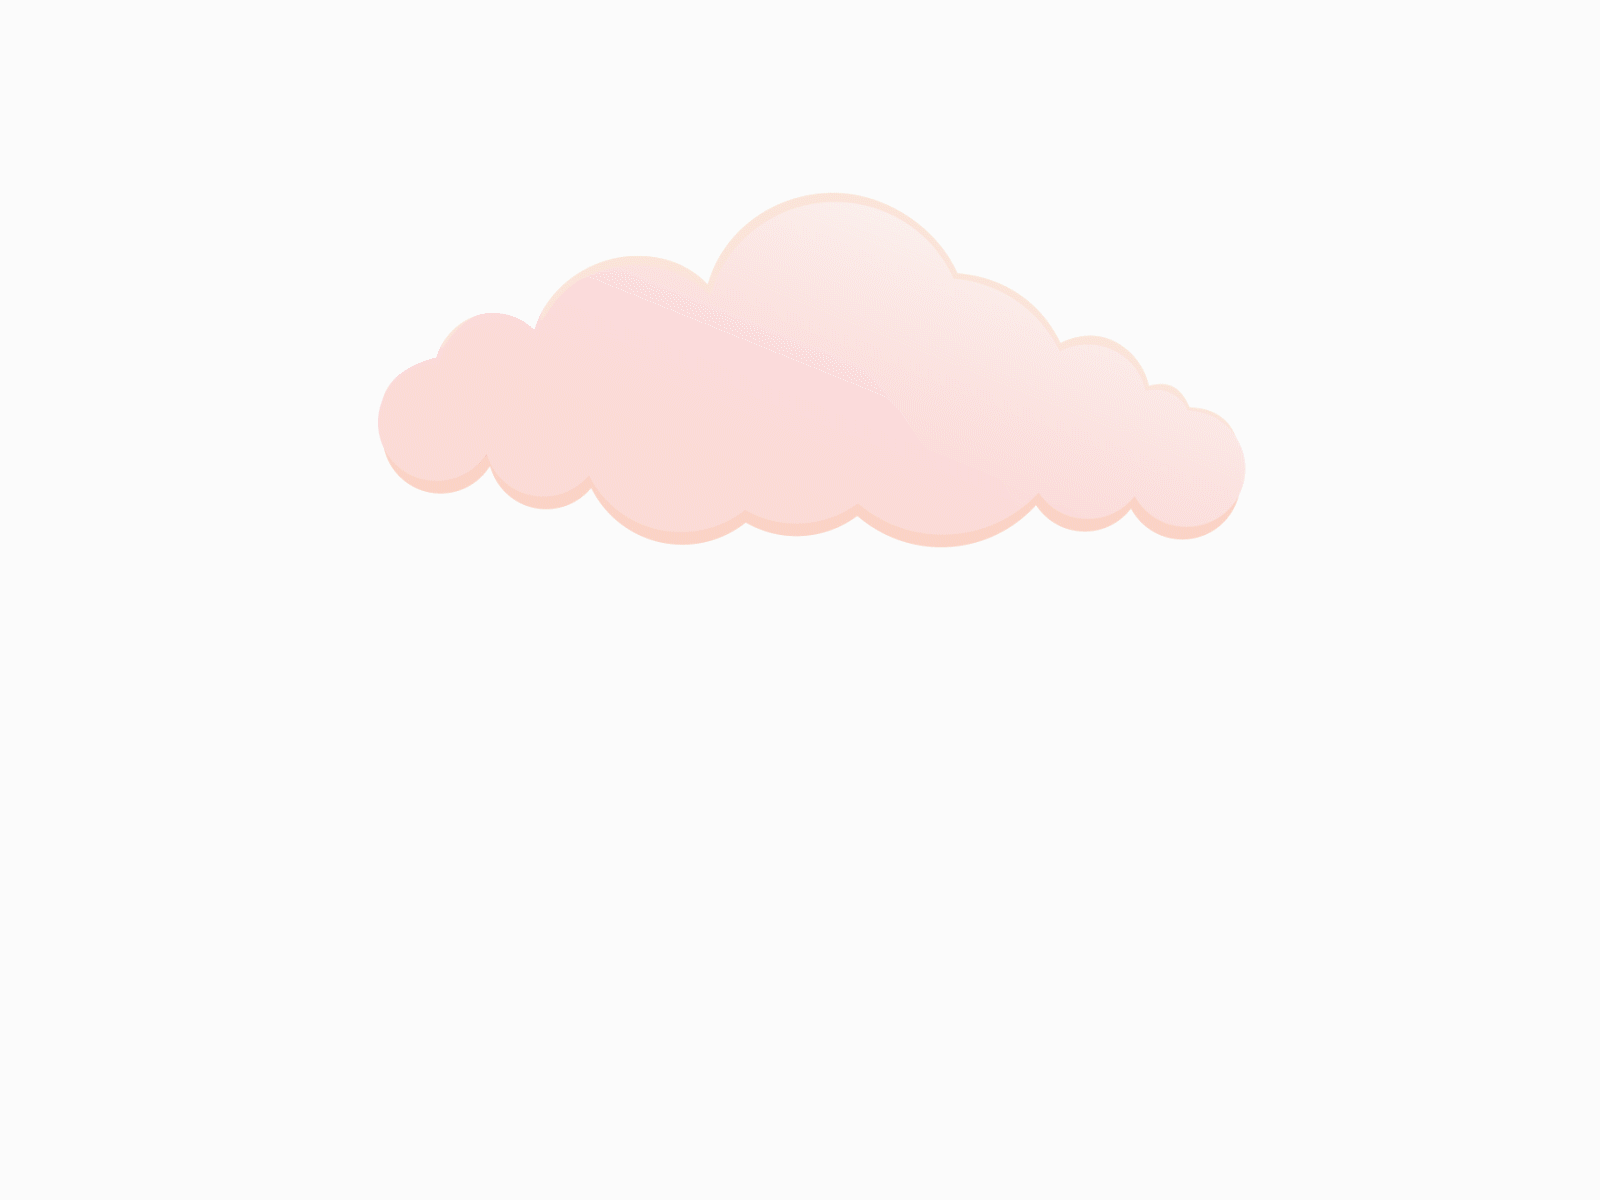 Aesthetic Dreamy E-mail cloud love after effects clouds dreamy email illustration illustrator motion graphics motion graphics design